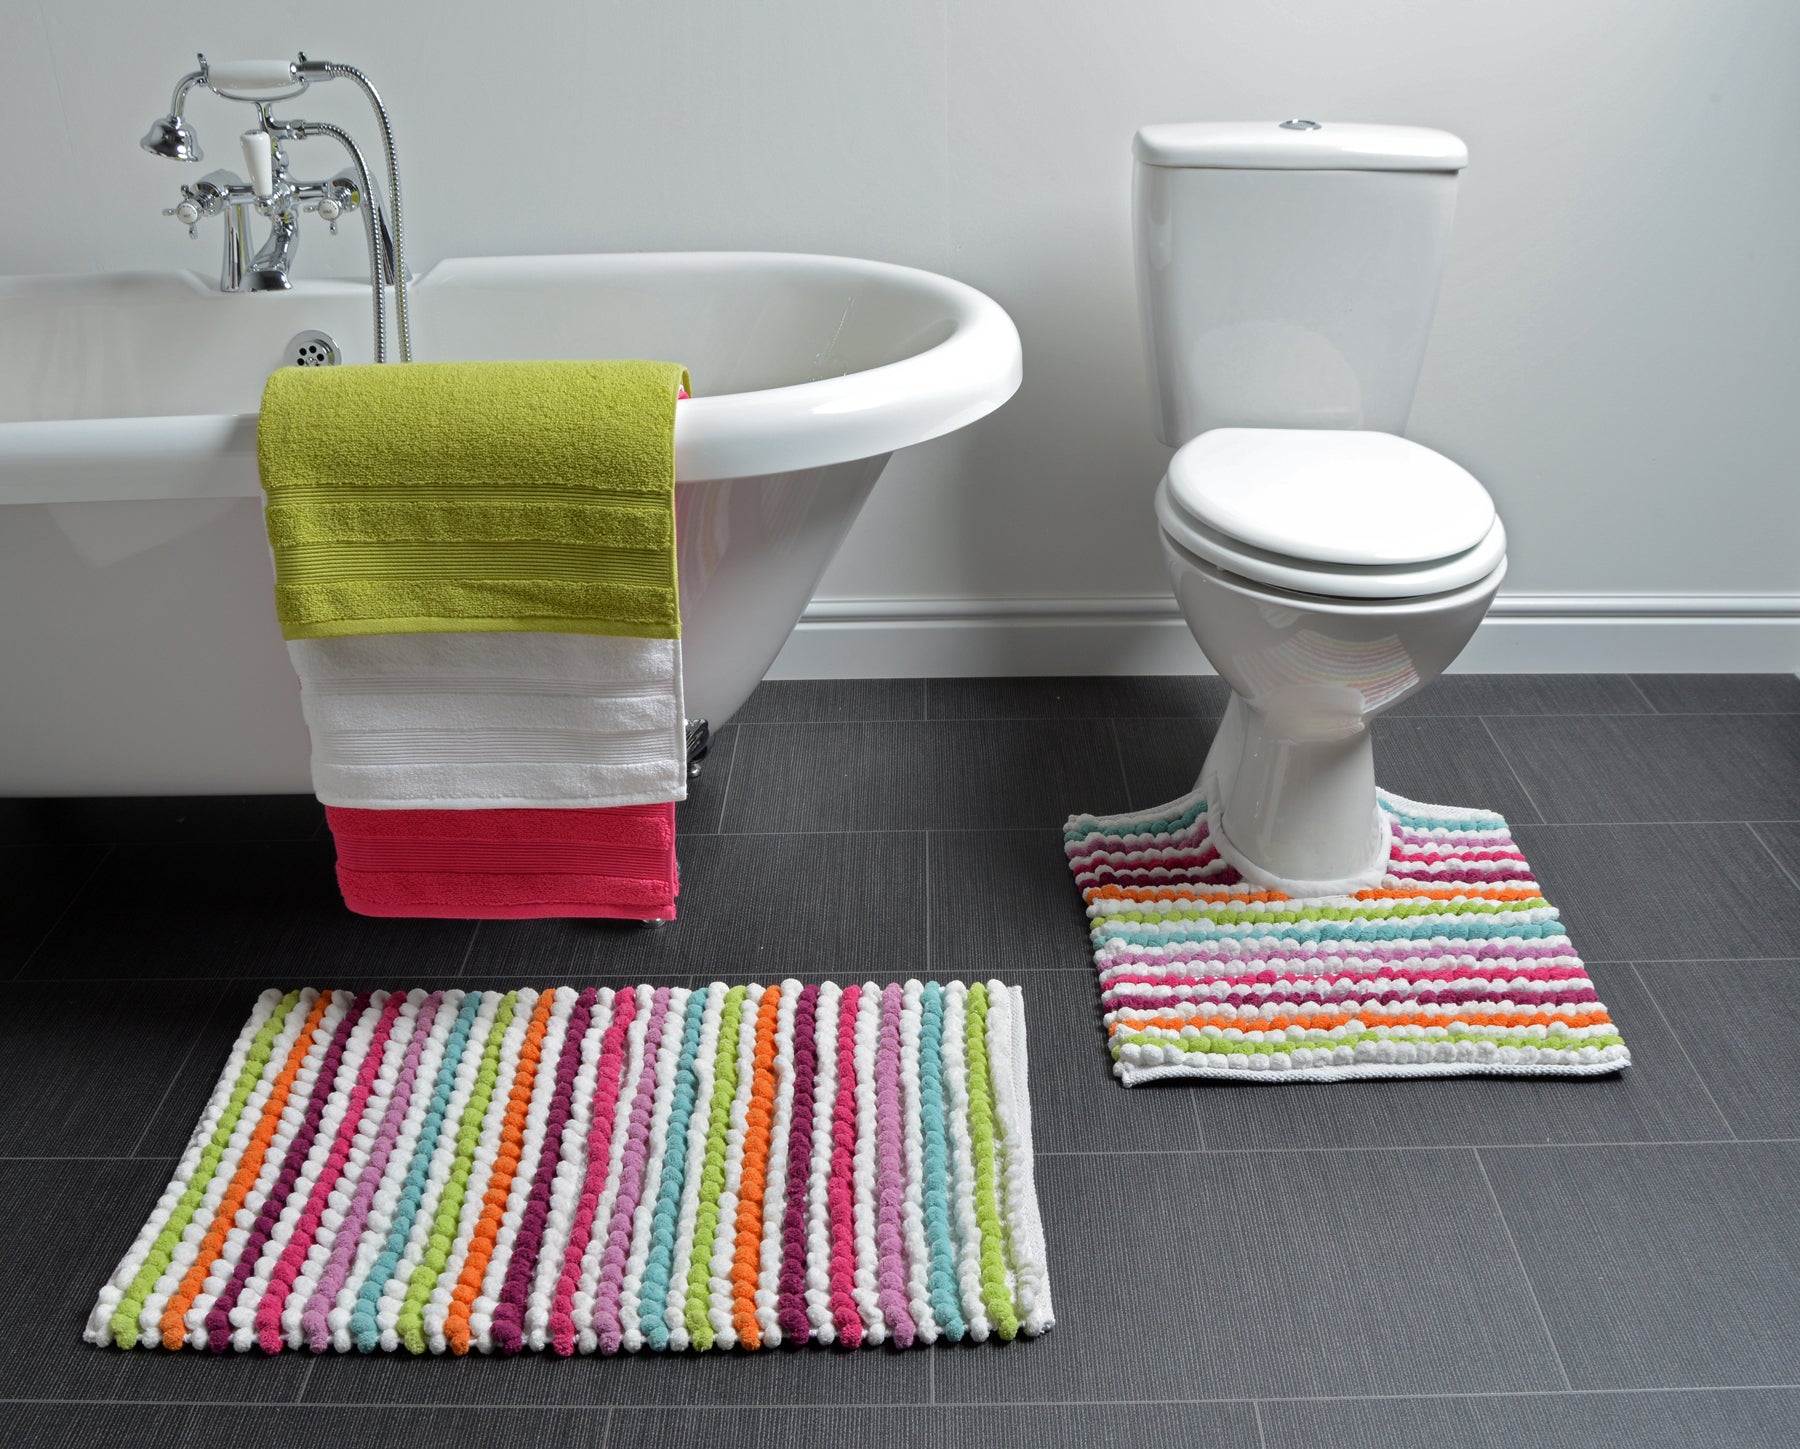 Pedestal Mats: A Buying Guide for Toilet Mats – Allure Bath Fashions